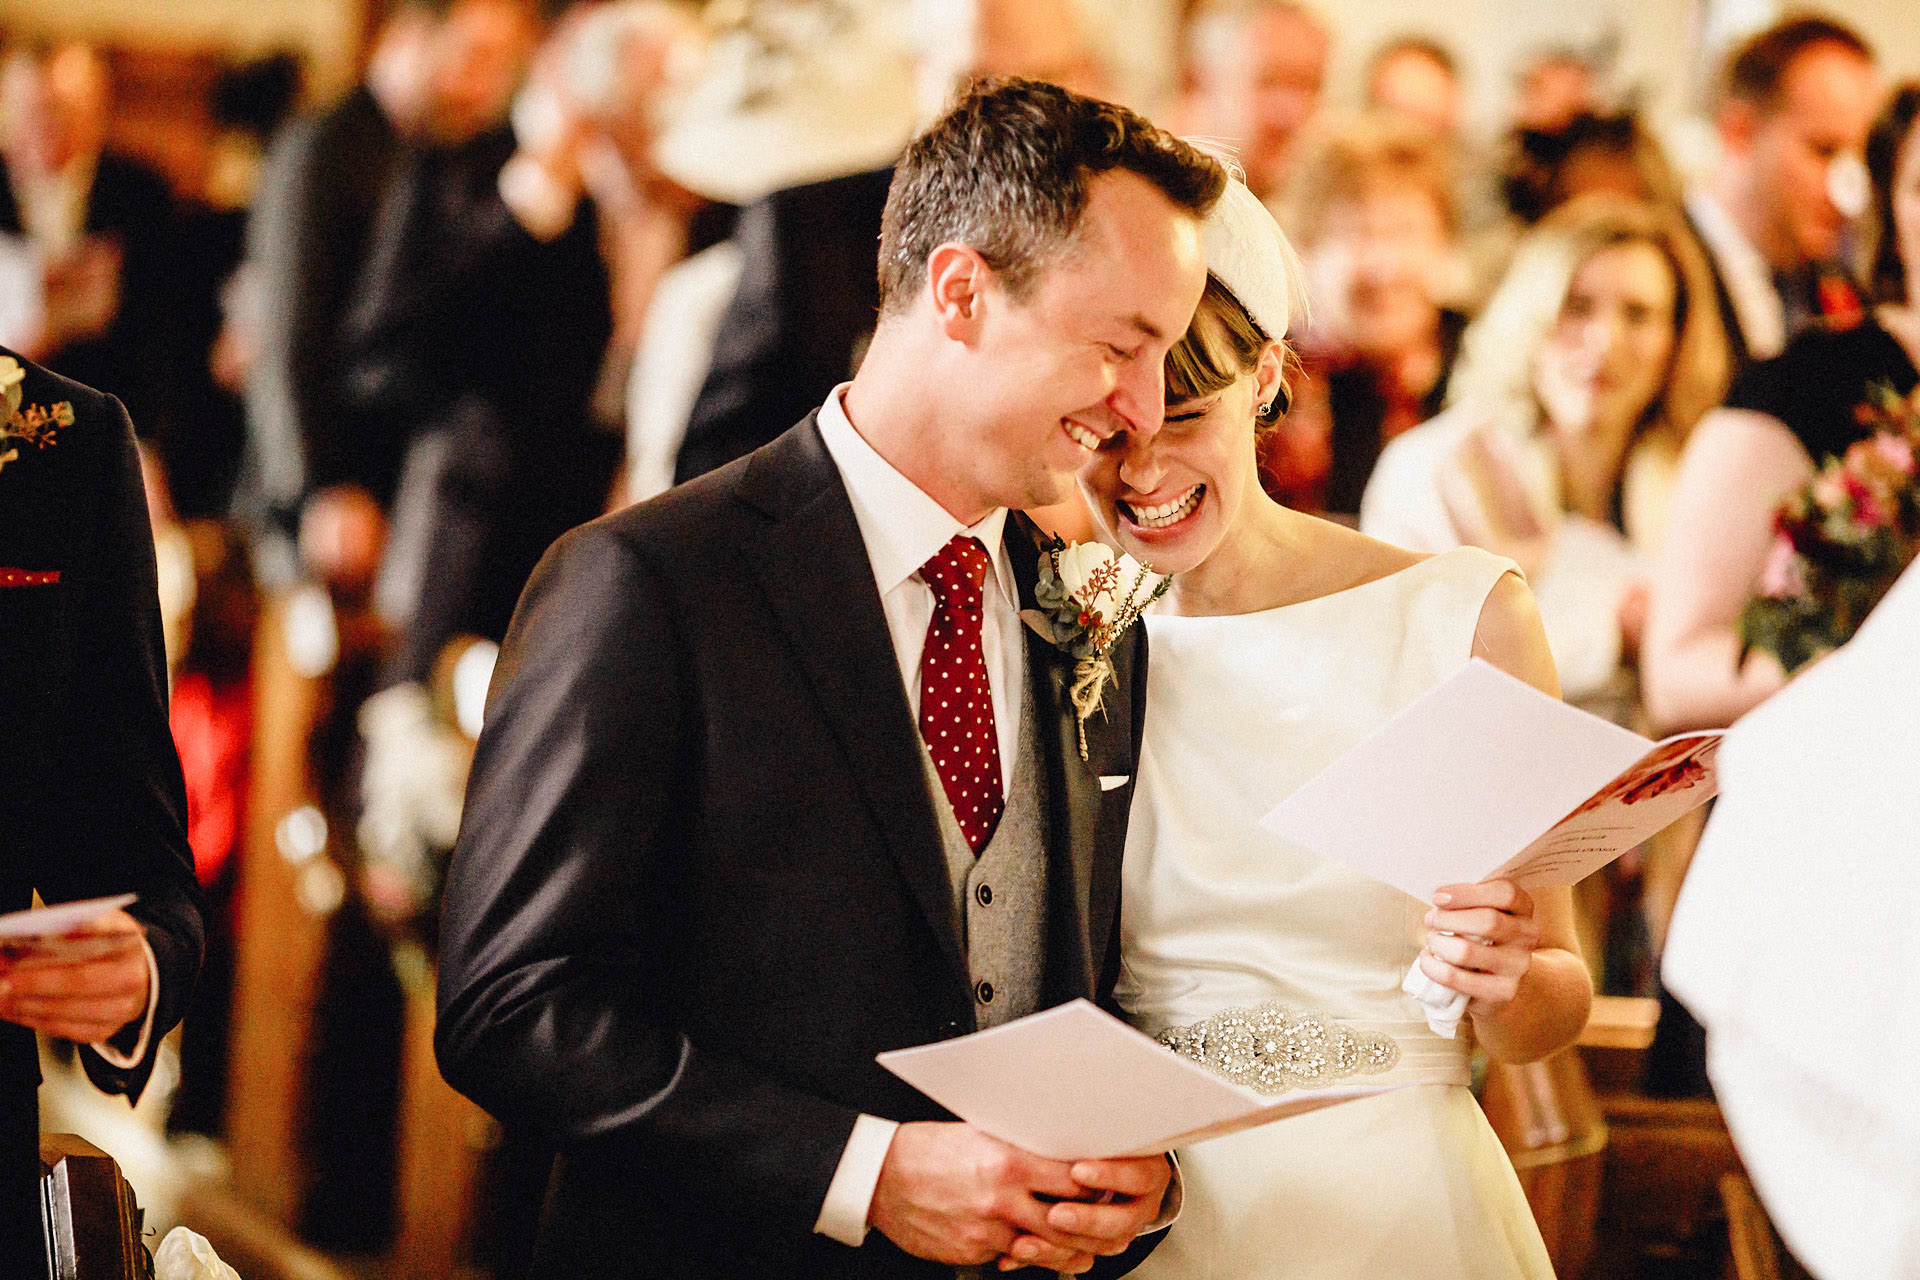 lovely photo of the bride and bridegroom laughing during the ceremony 